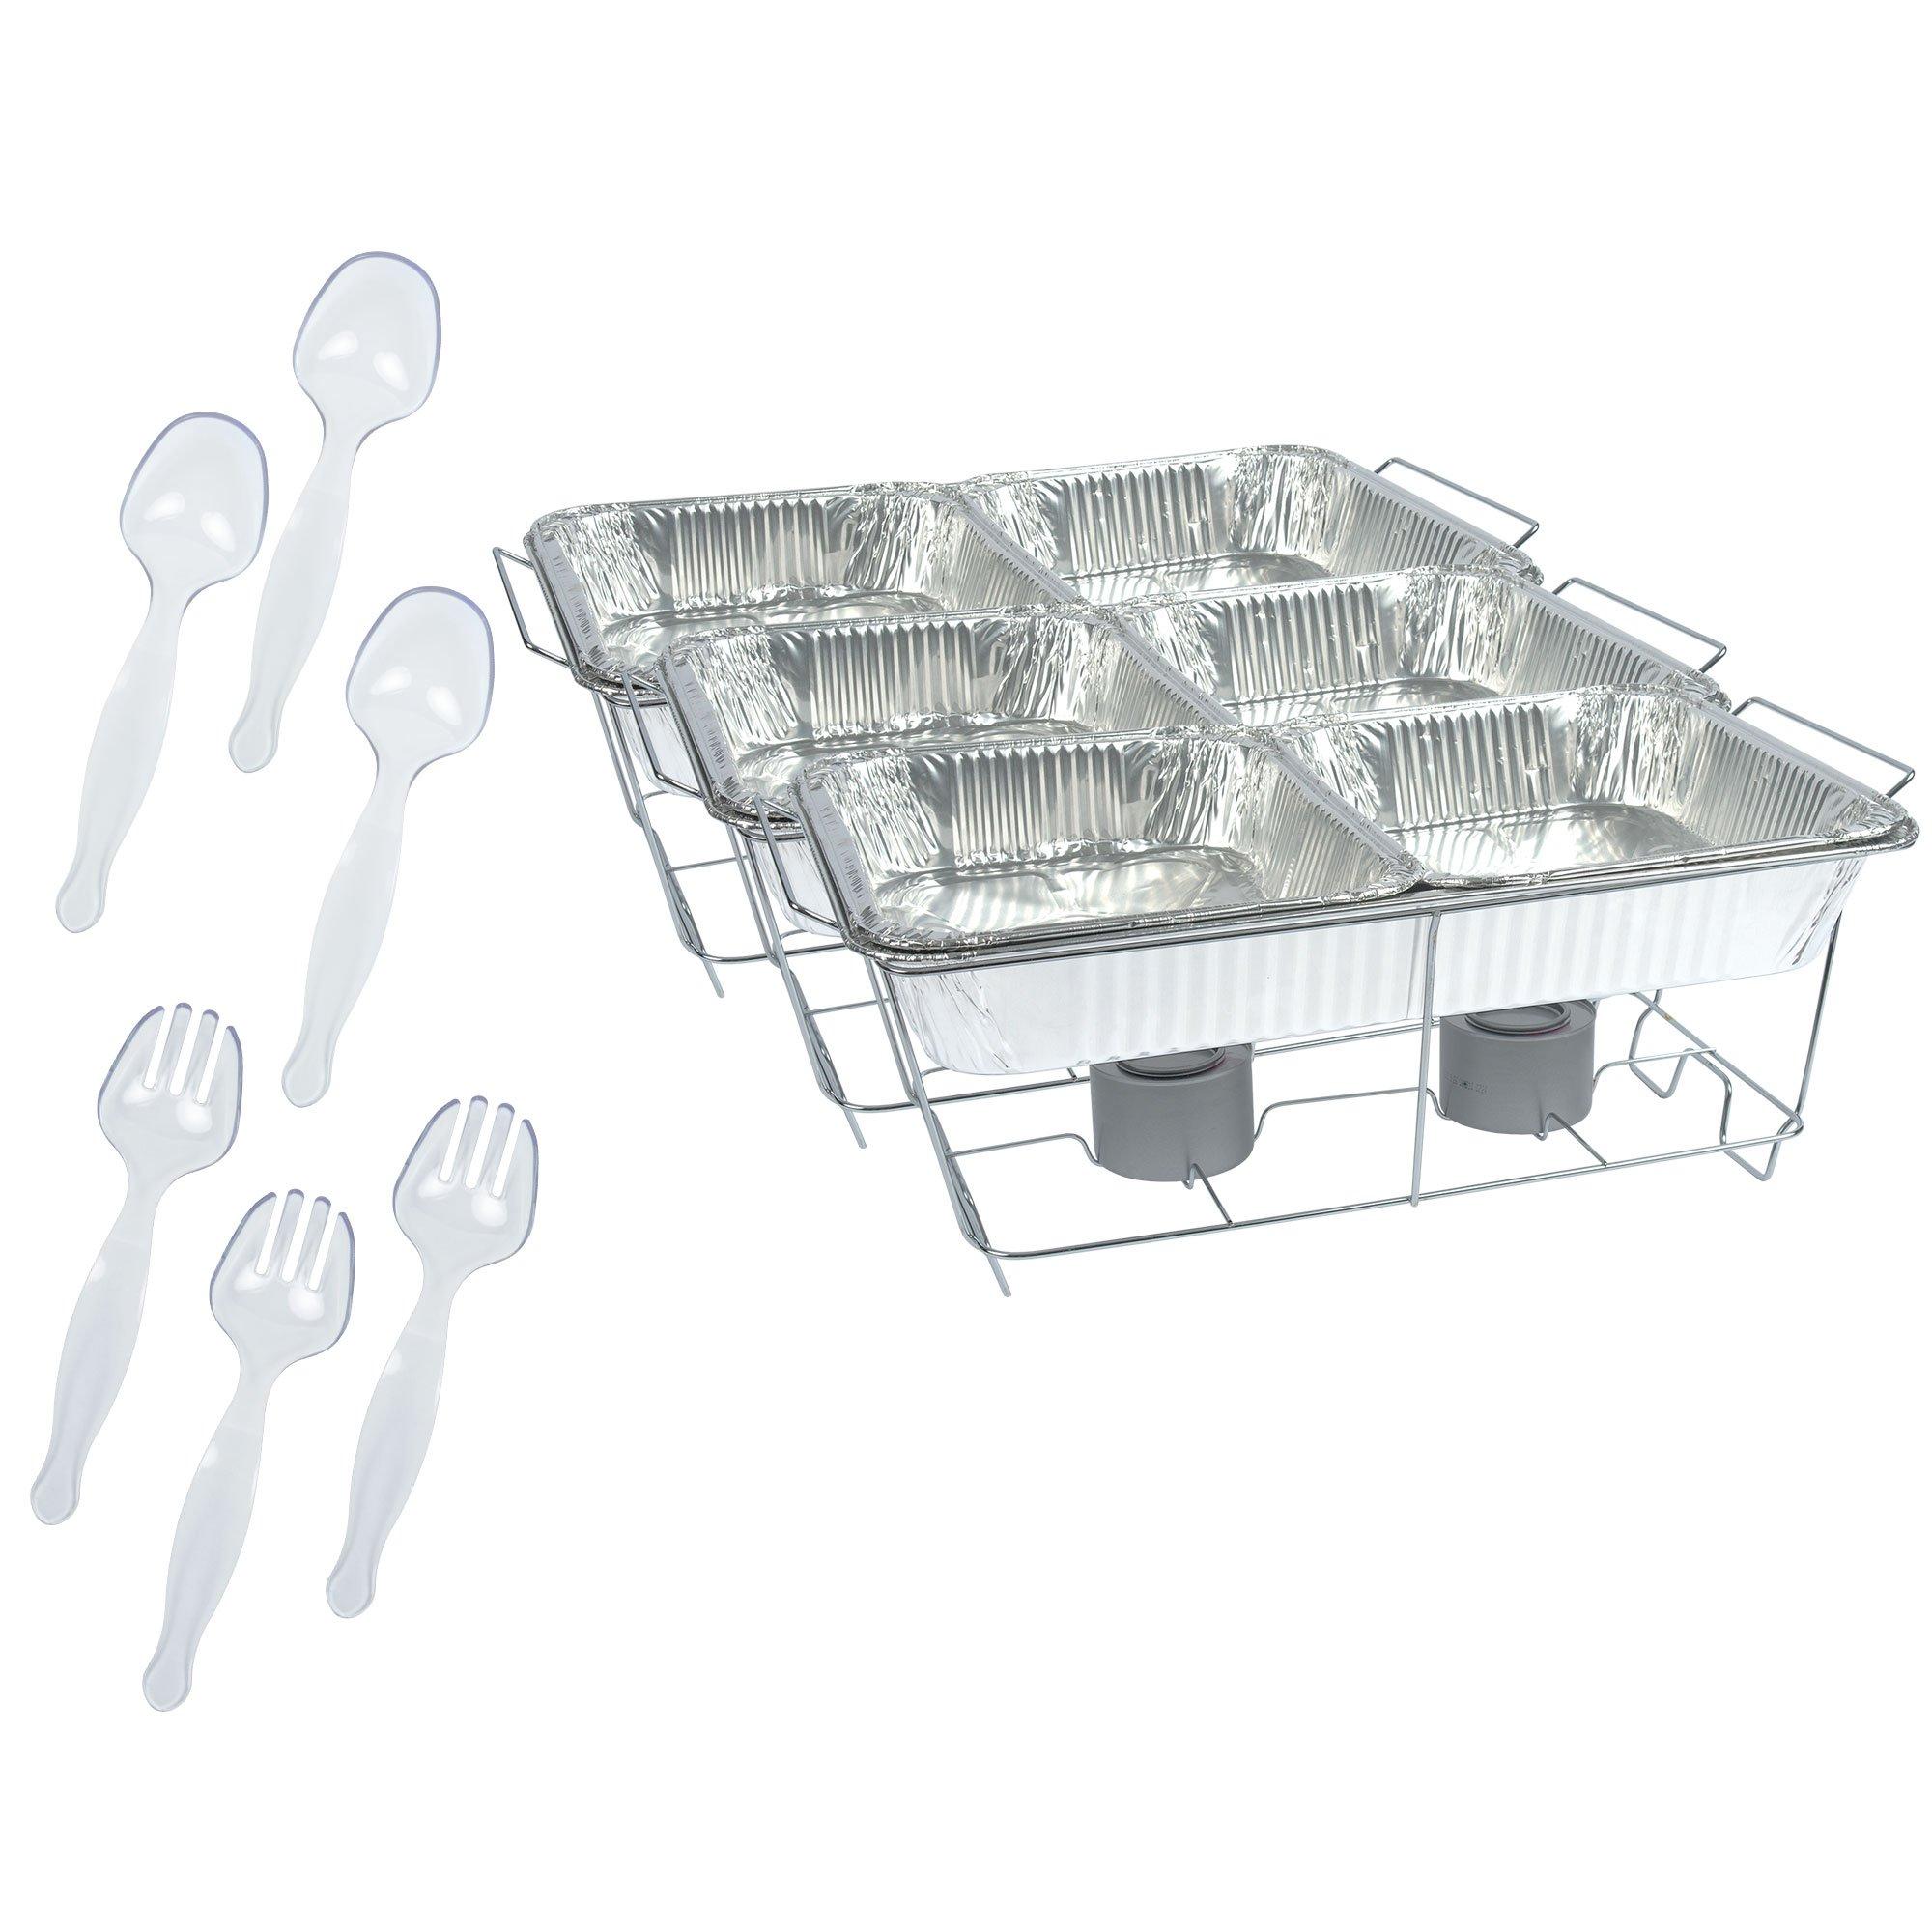  3 Pack of Disposable Foil Pan Holders, Party Set